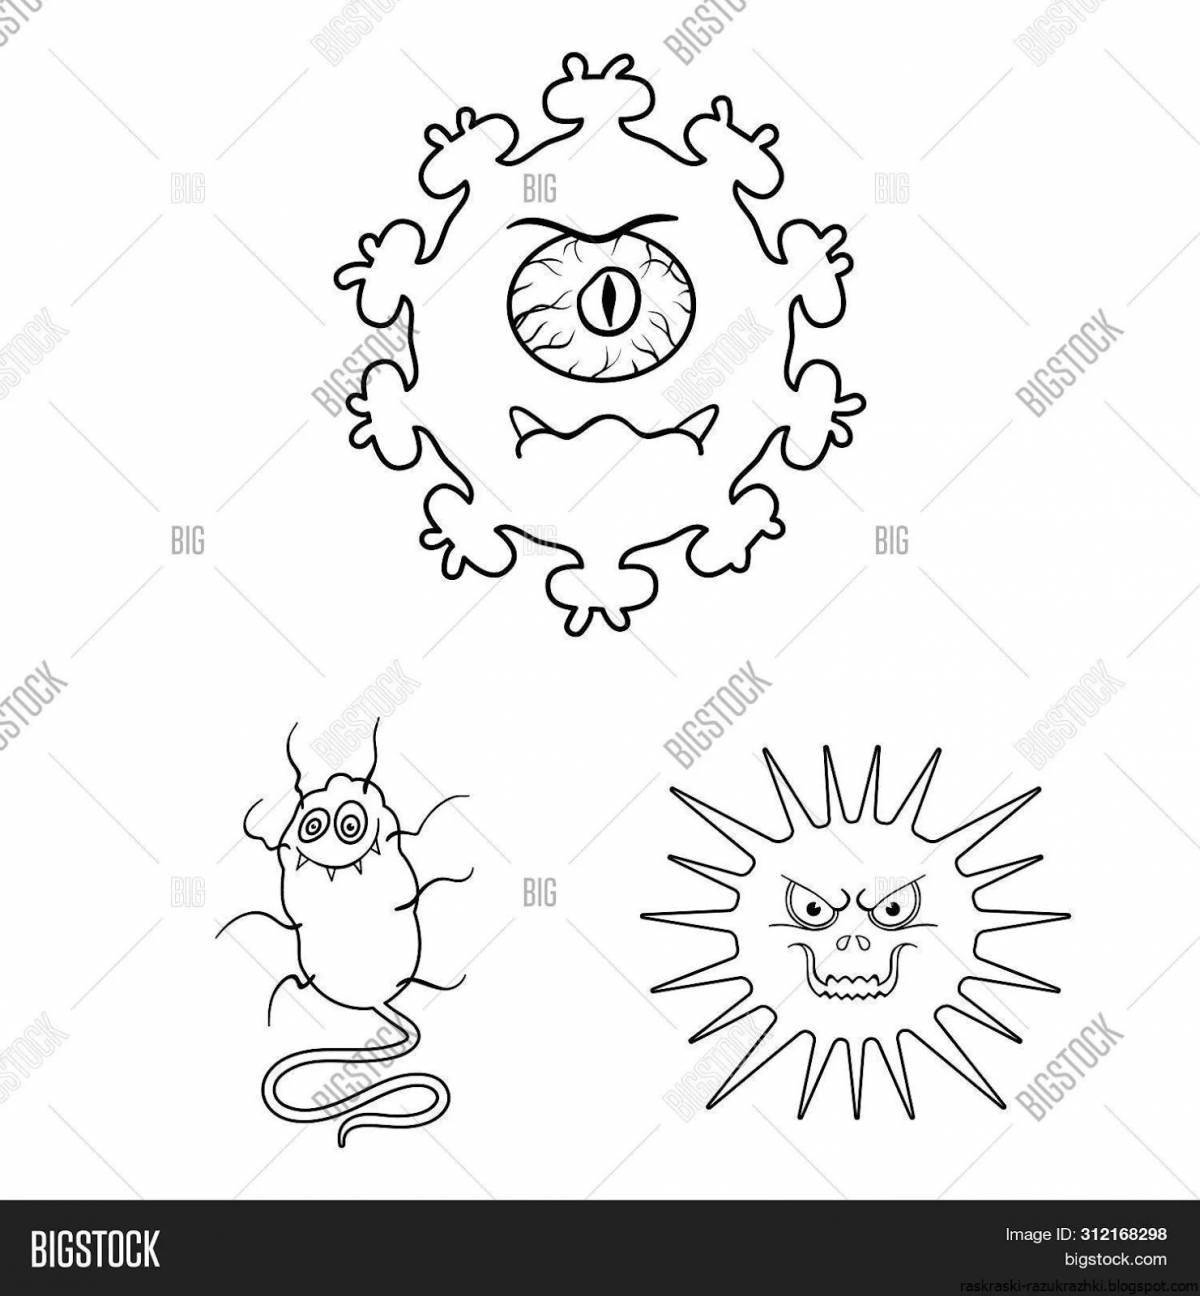 Coloring page inviting bacteria